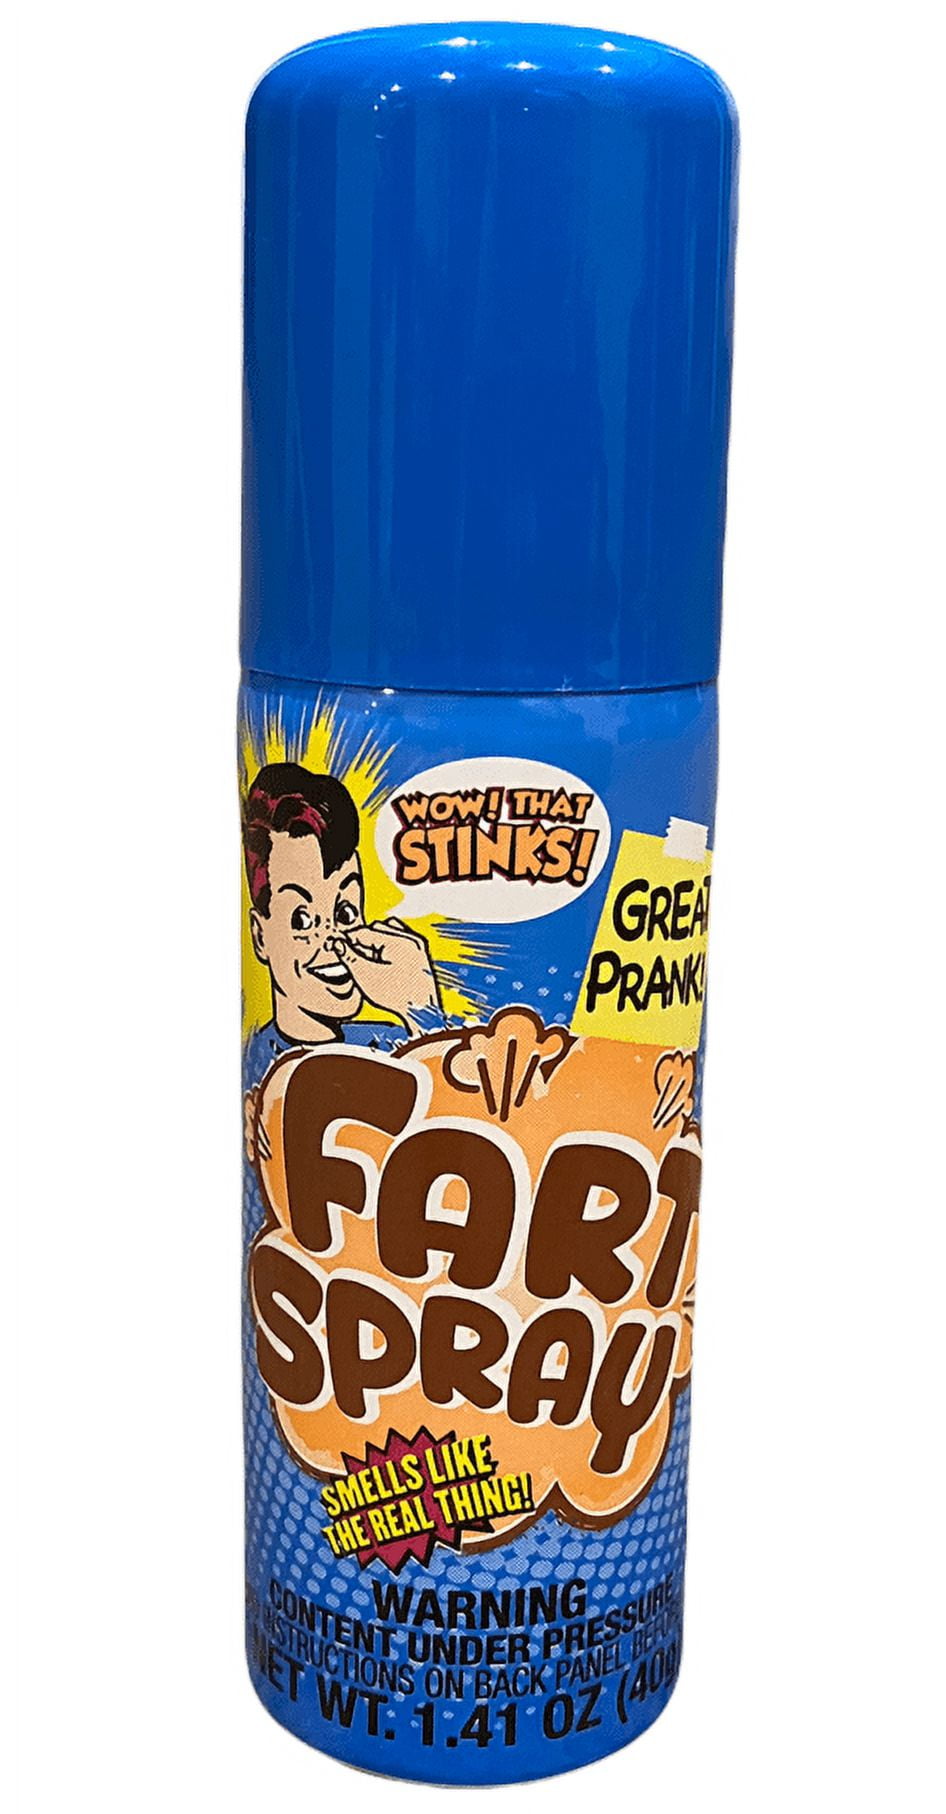 2 DIFFERENT FART SPRAY CANS - Prank Gag Liquid Stinky Poop Ass